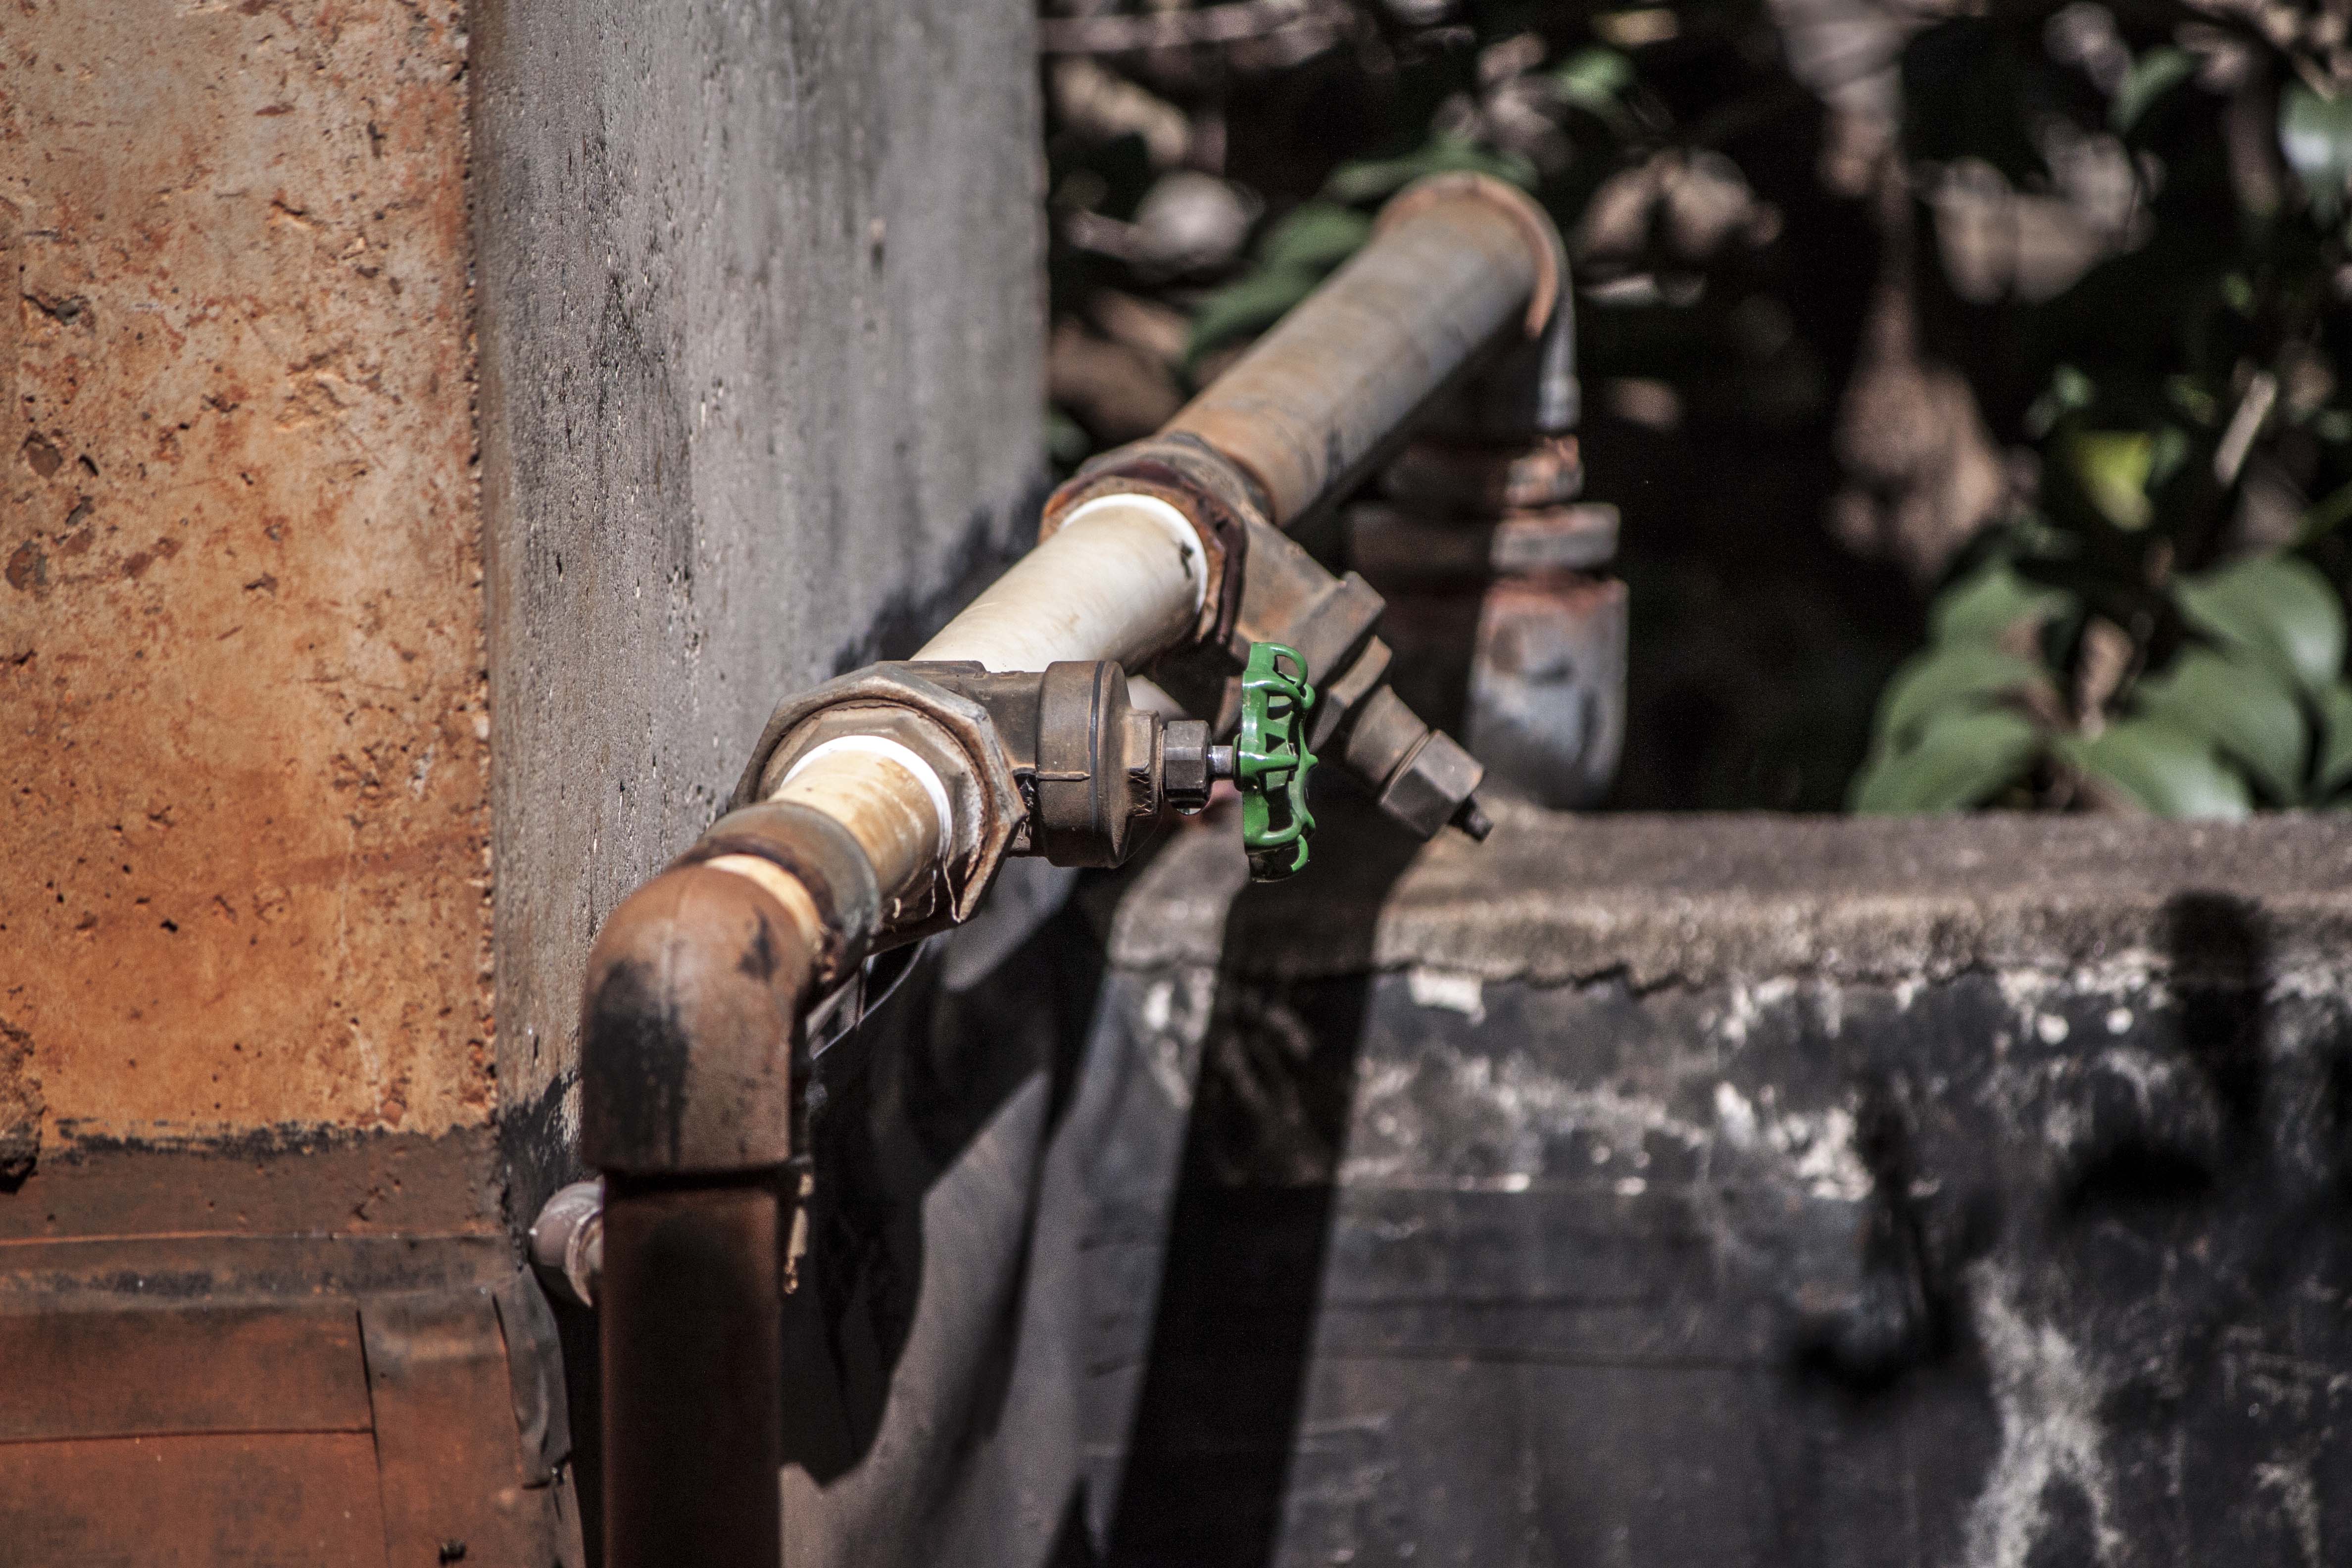 Gritty valve and pipe, Plumbing, Wet, Water, Waste, HQ Photo